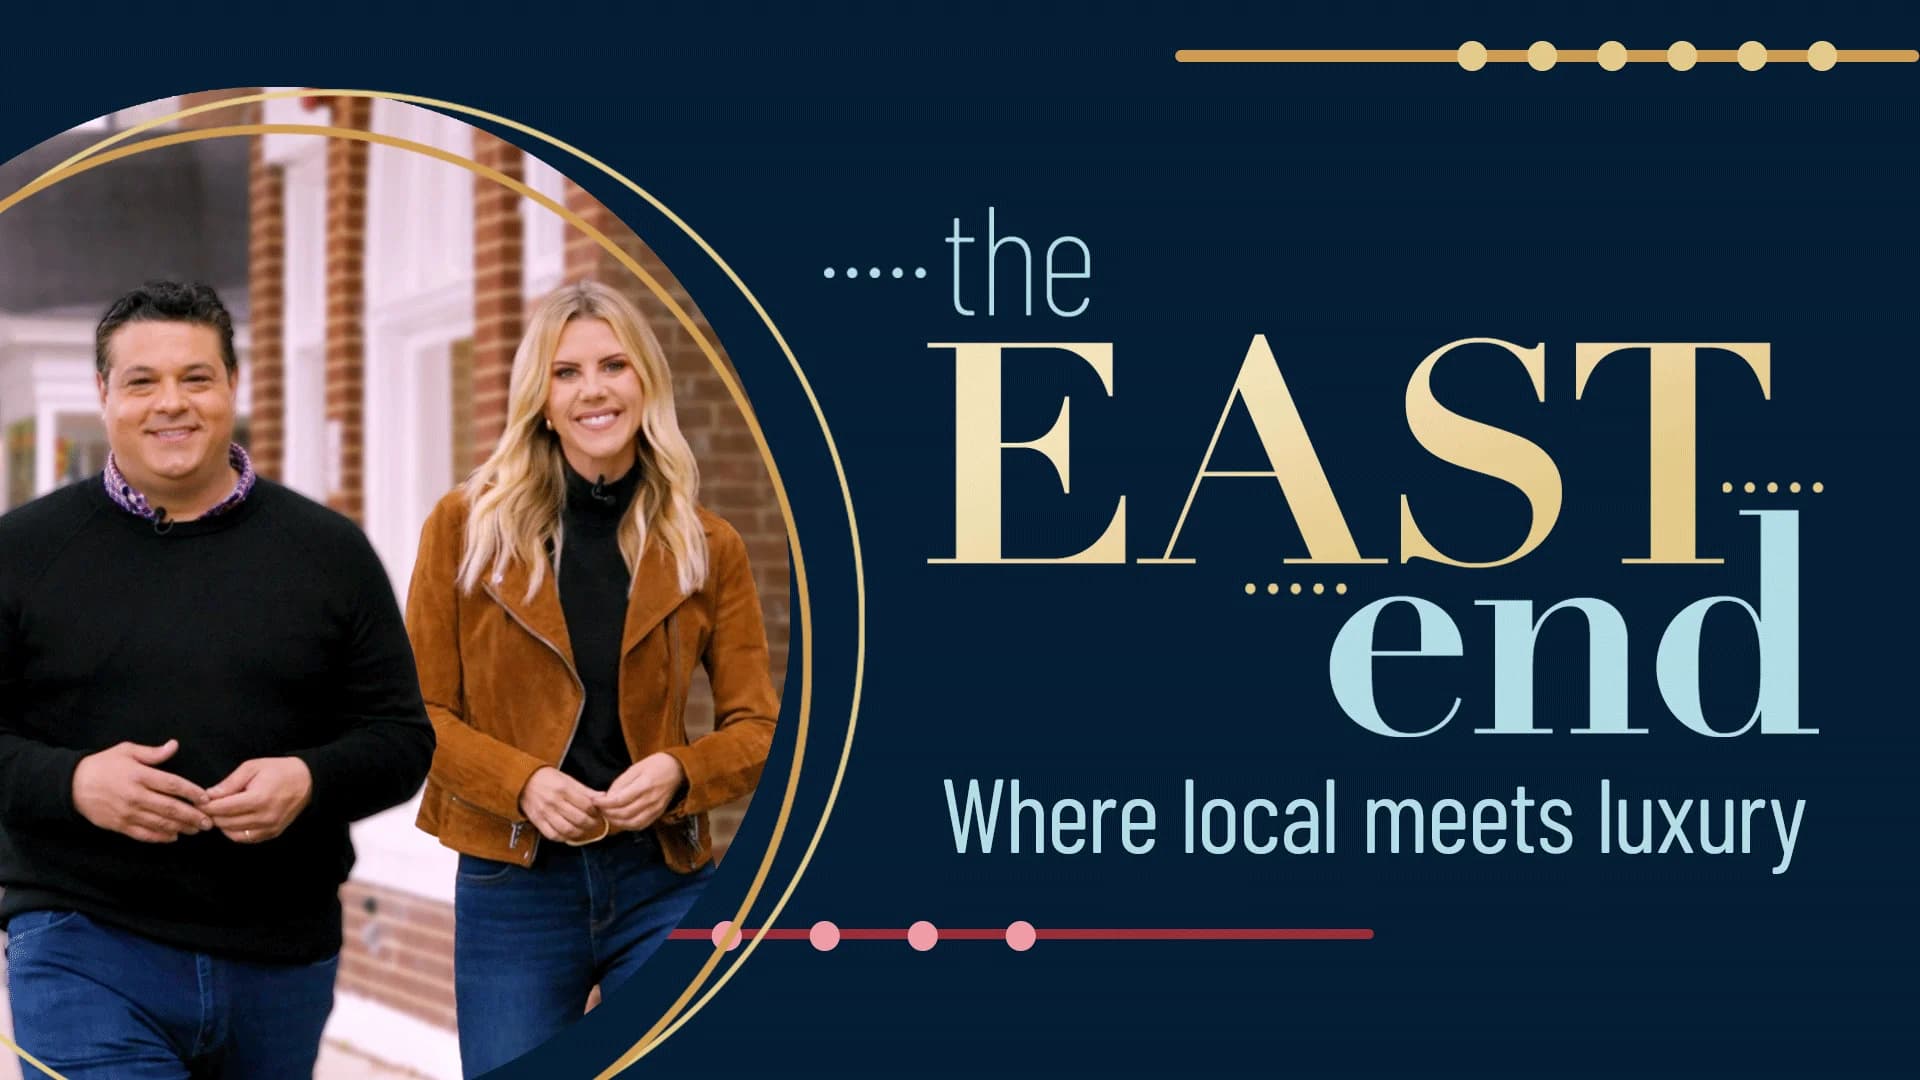 What East End spots do you love to visit? Tell us here!